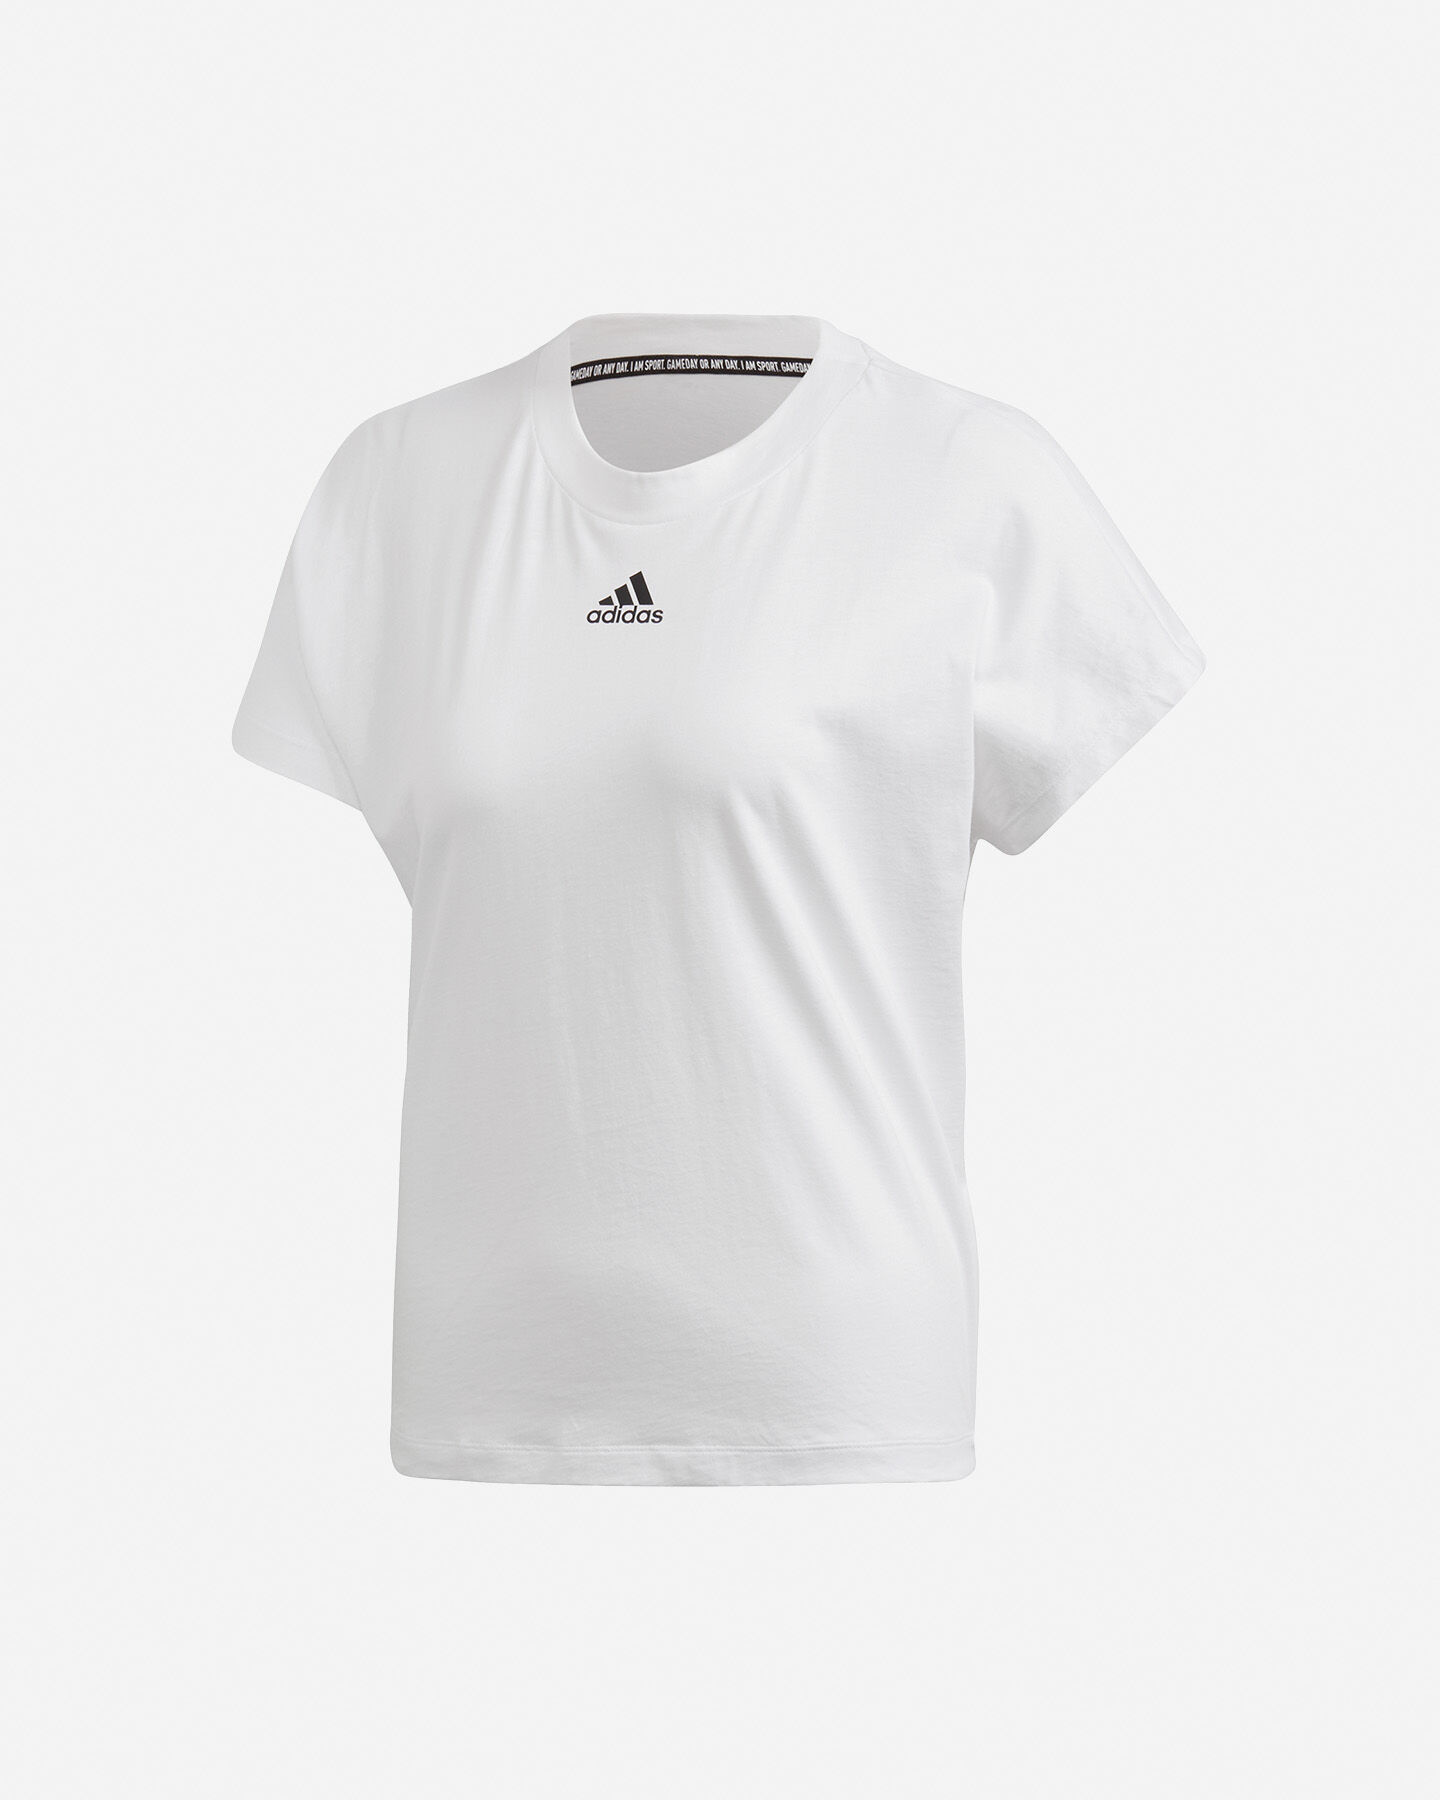  T-Shirt ADIDAS MUST HAVES 3-STRIPES W S5147092|UNI|XS scatto 0